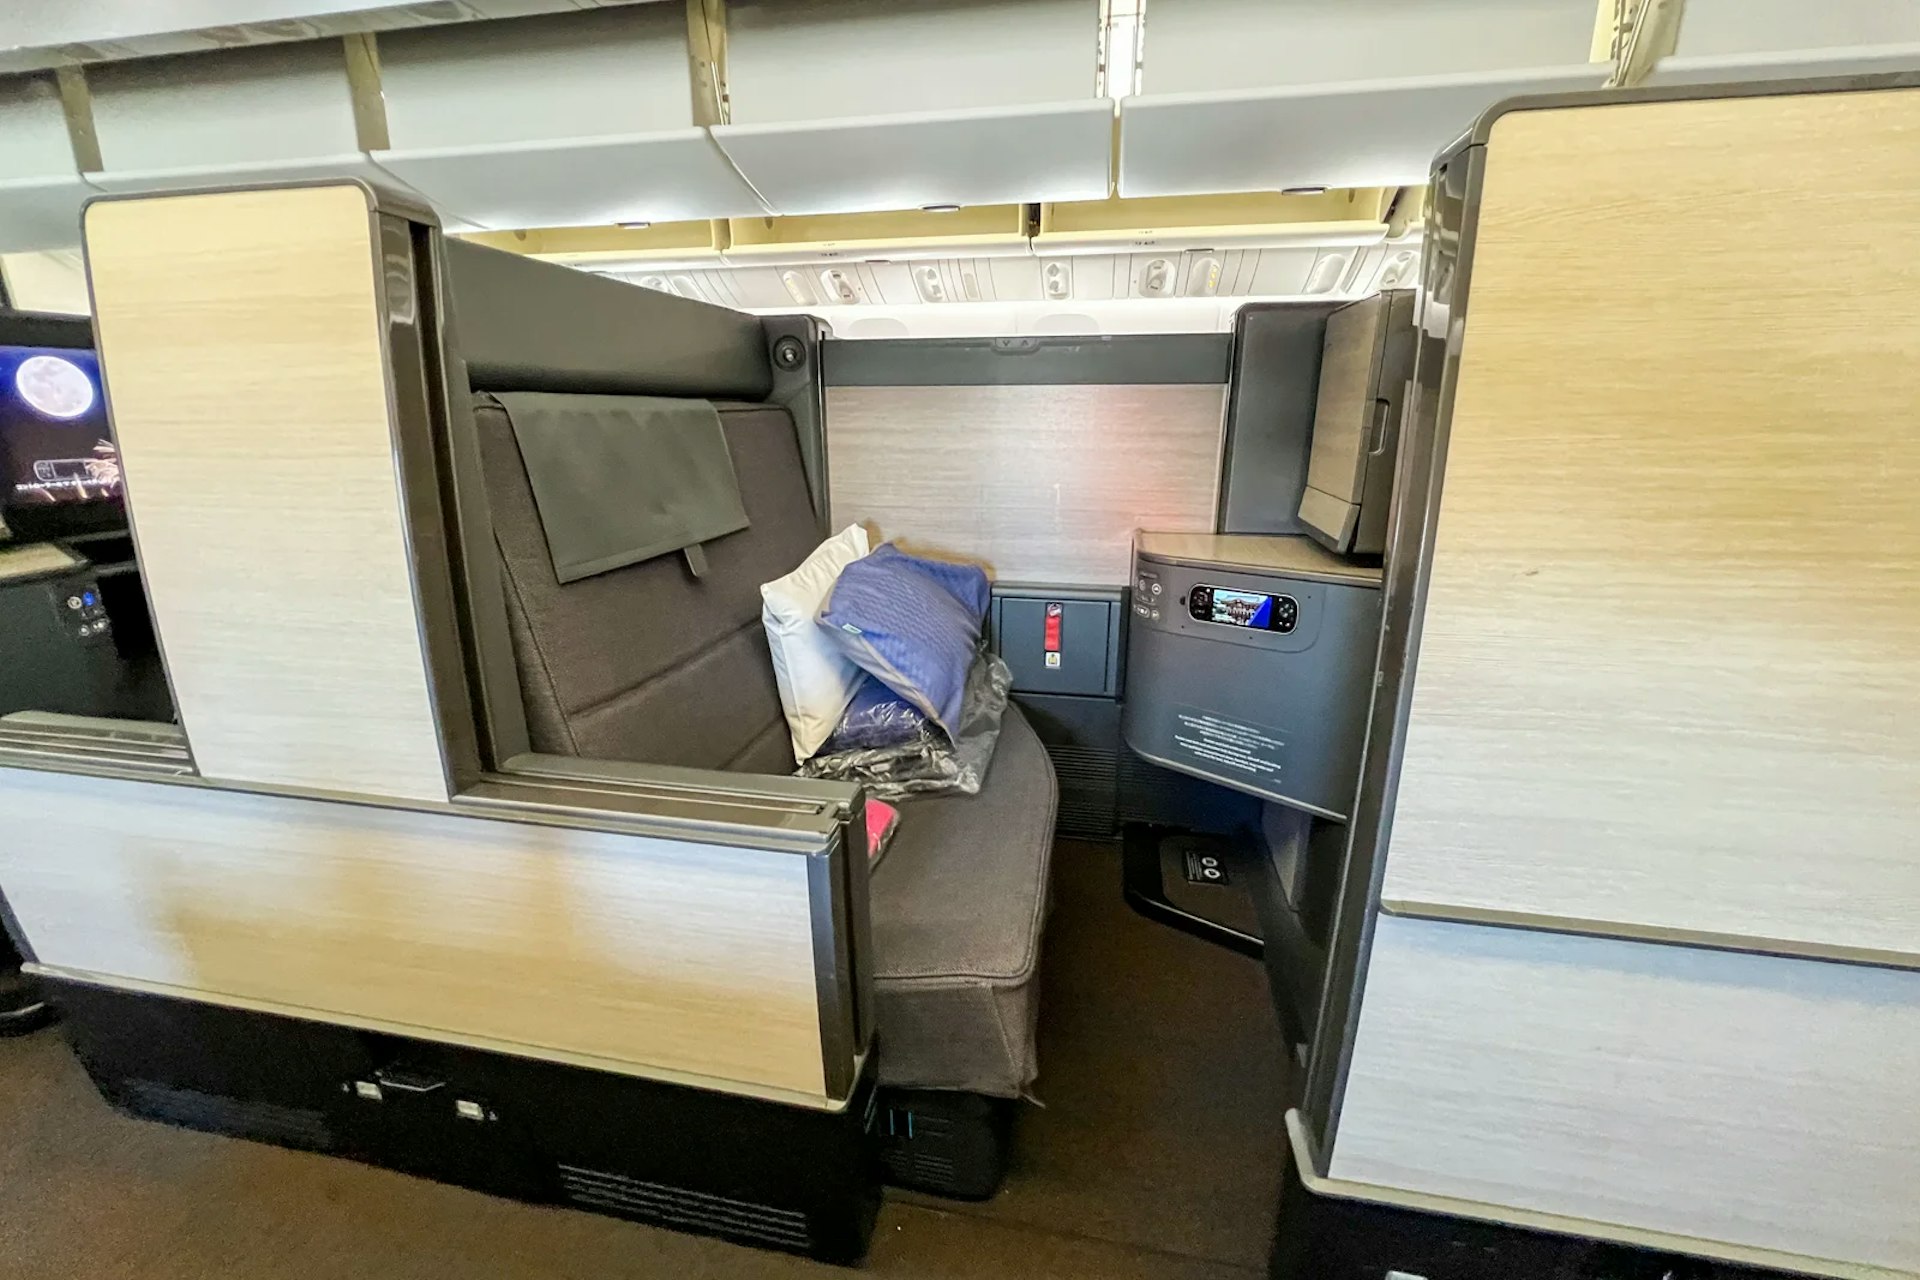 You can fly to Dubai in All Nippon Airways' esteemed “The Room” business class from just 104,000 miles round-trip 